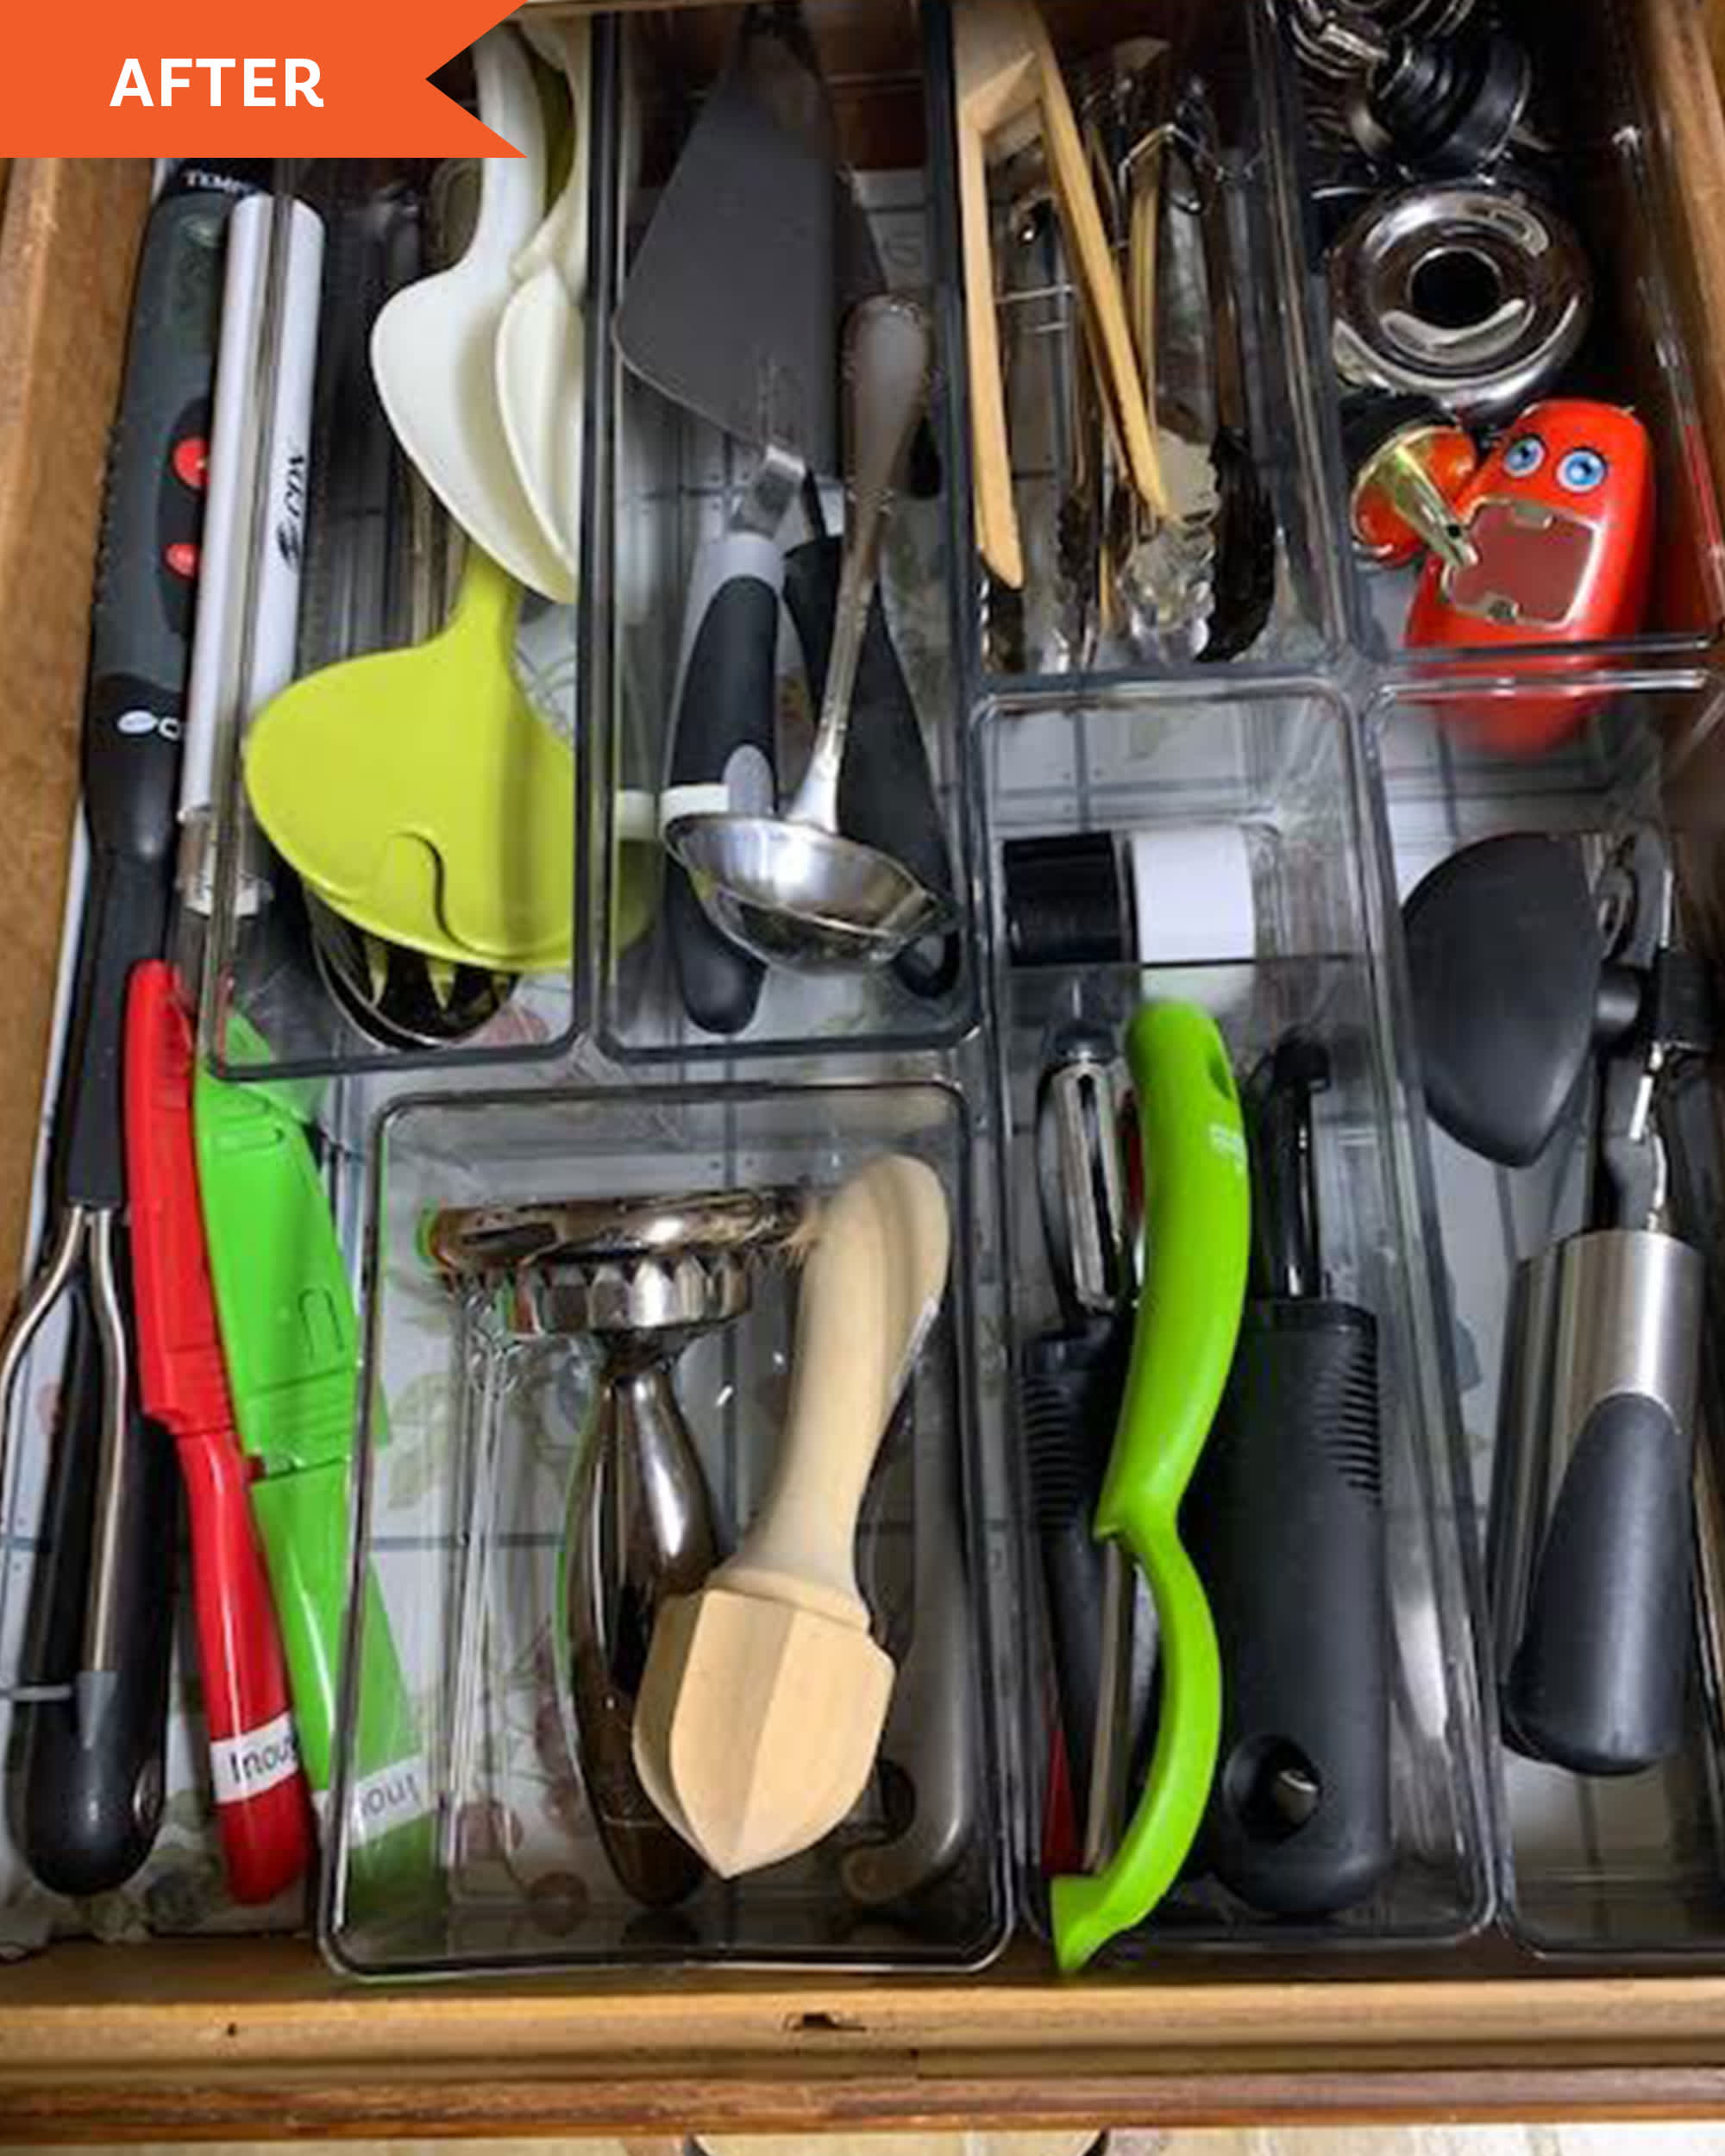 Slaying Your Kitchen Clutter With Simple Drawer Organizers - Food Dolls